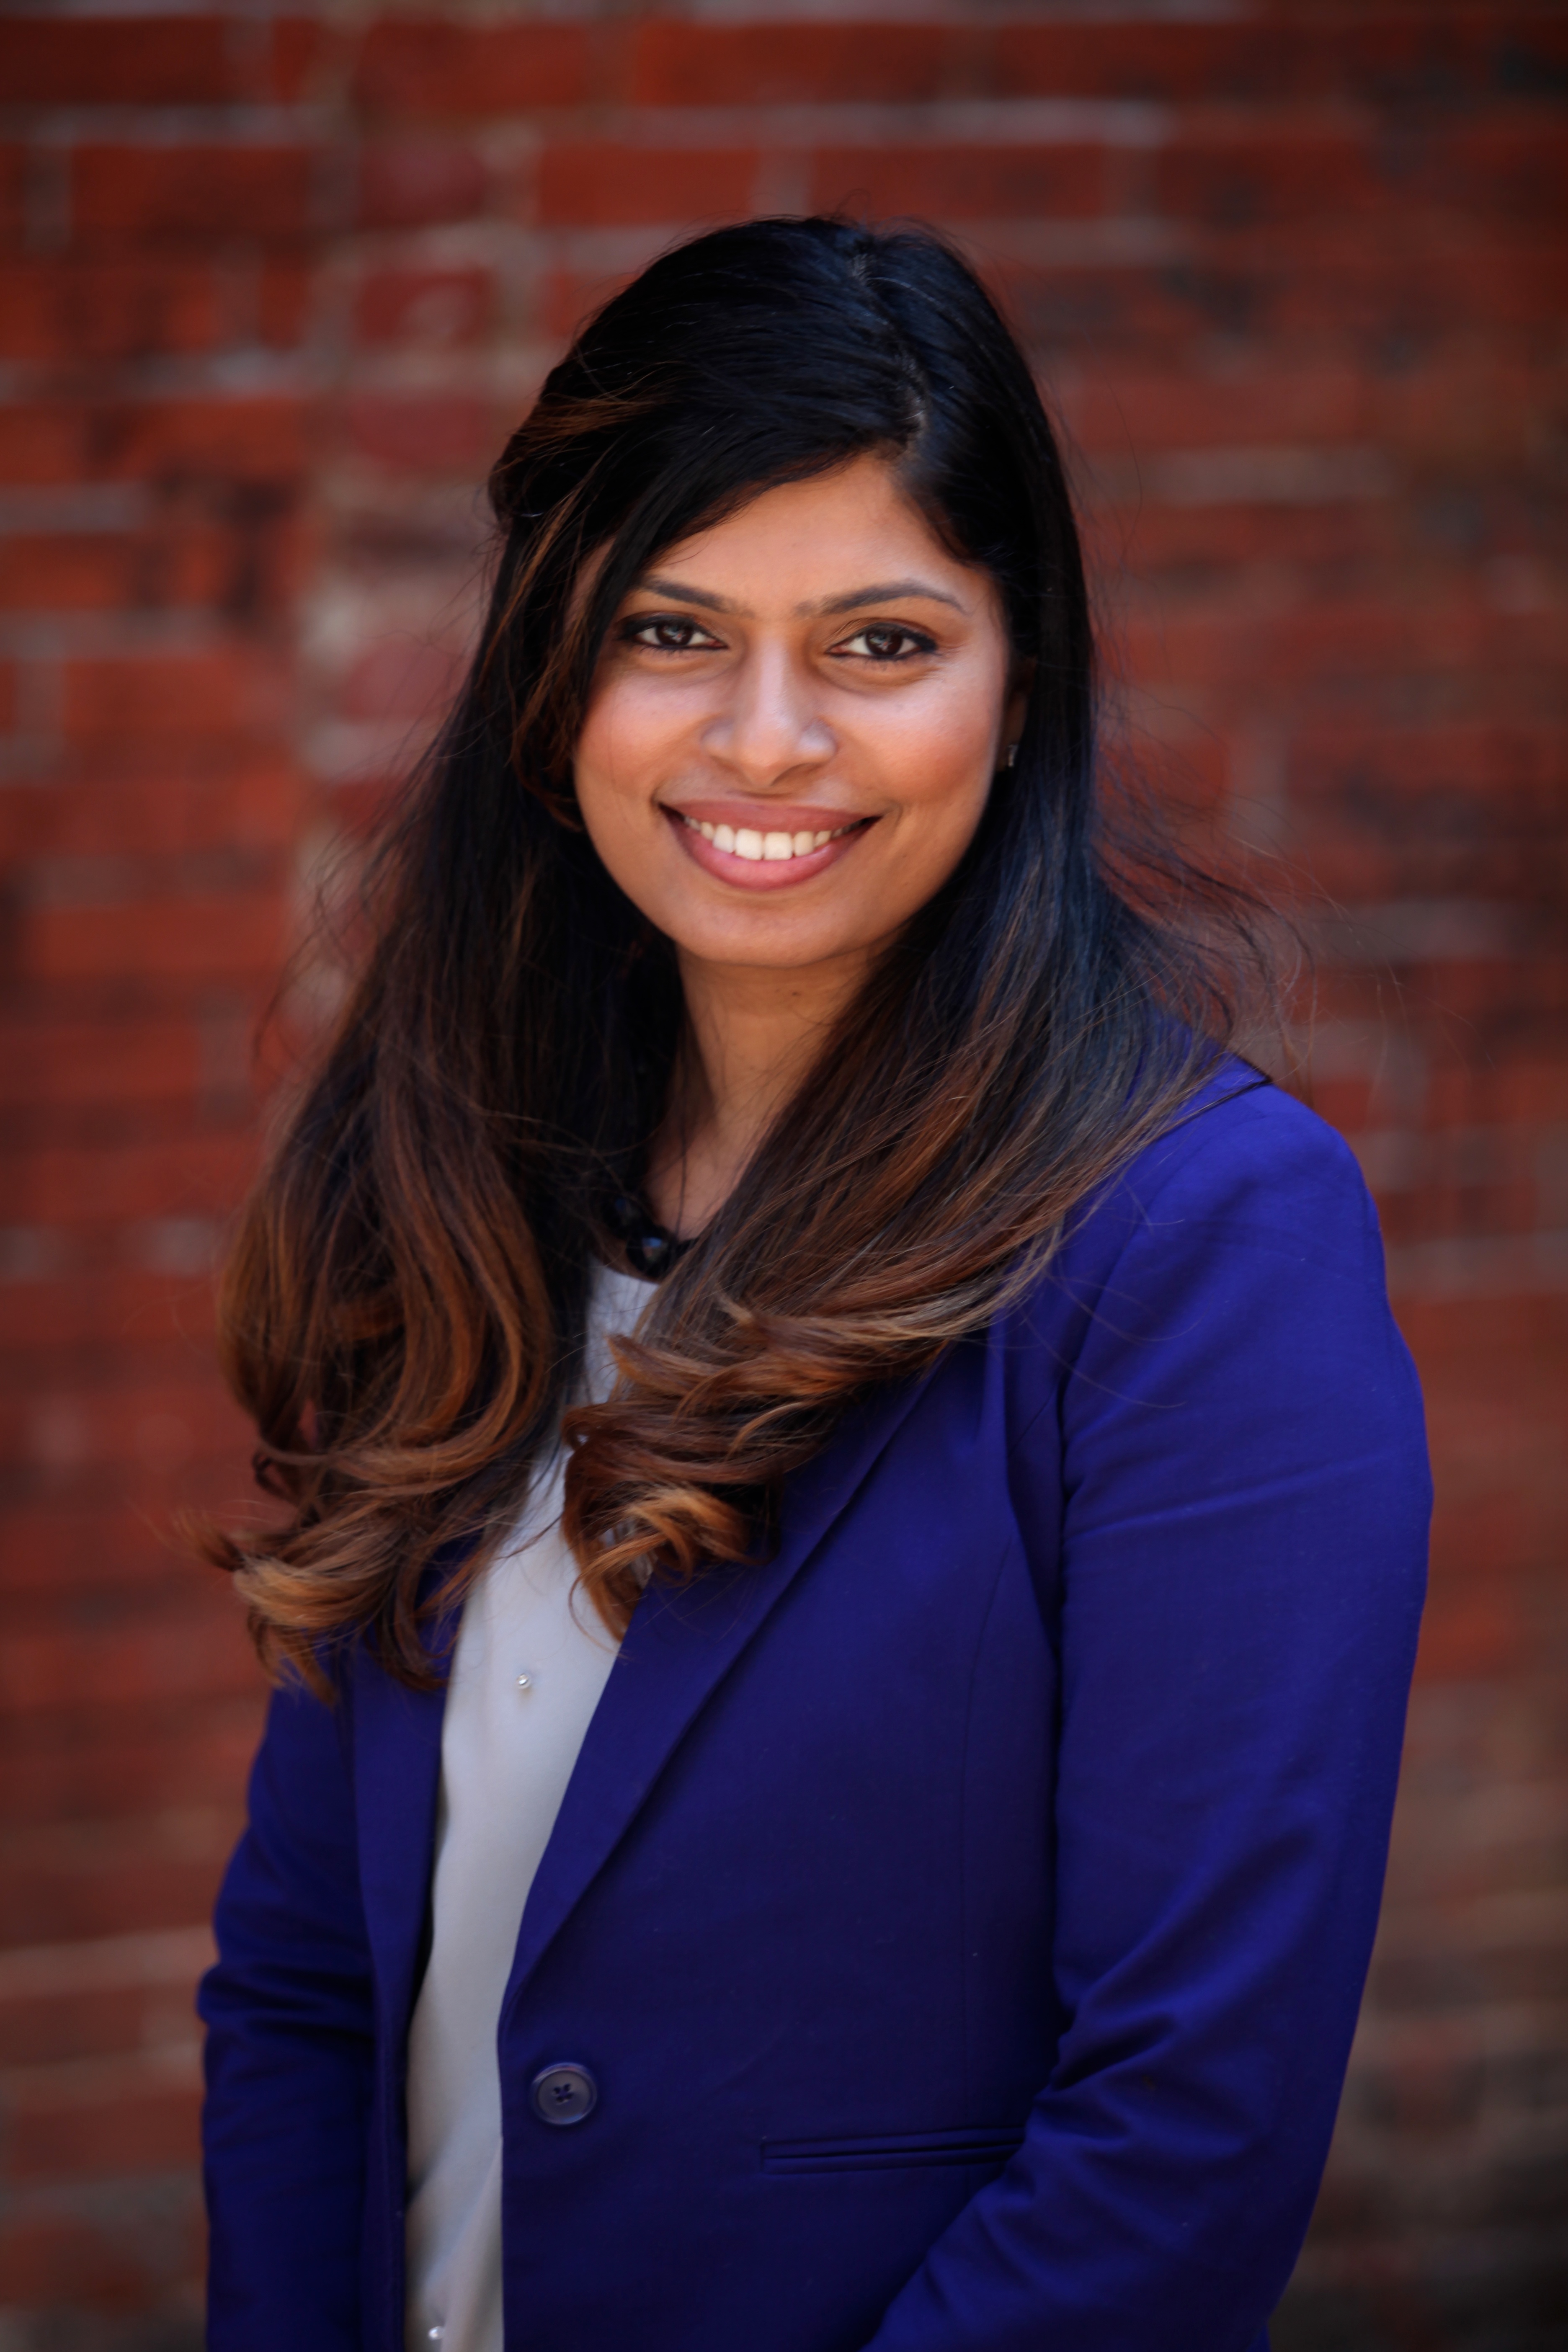 Meet Nithi Thomas, Matchbook Learning’s new Director of Instructional Technology!